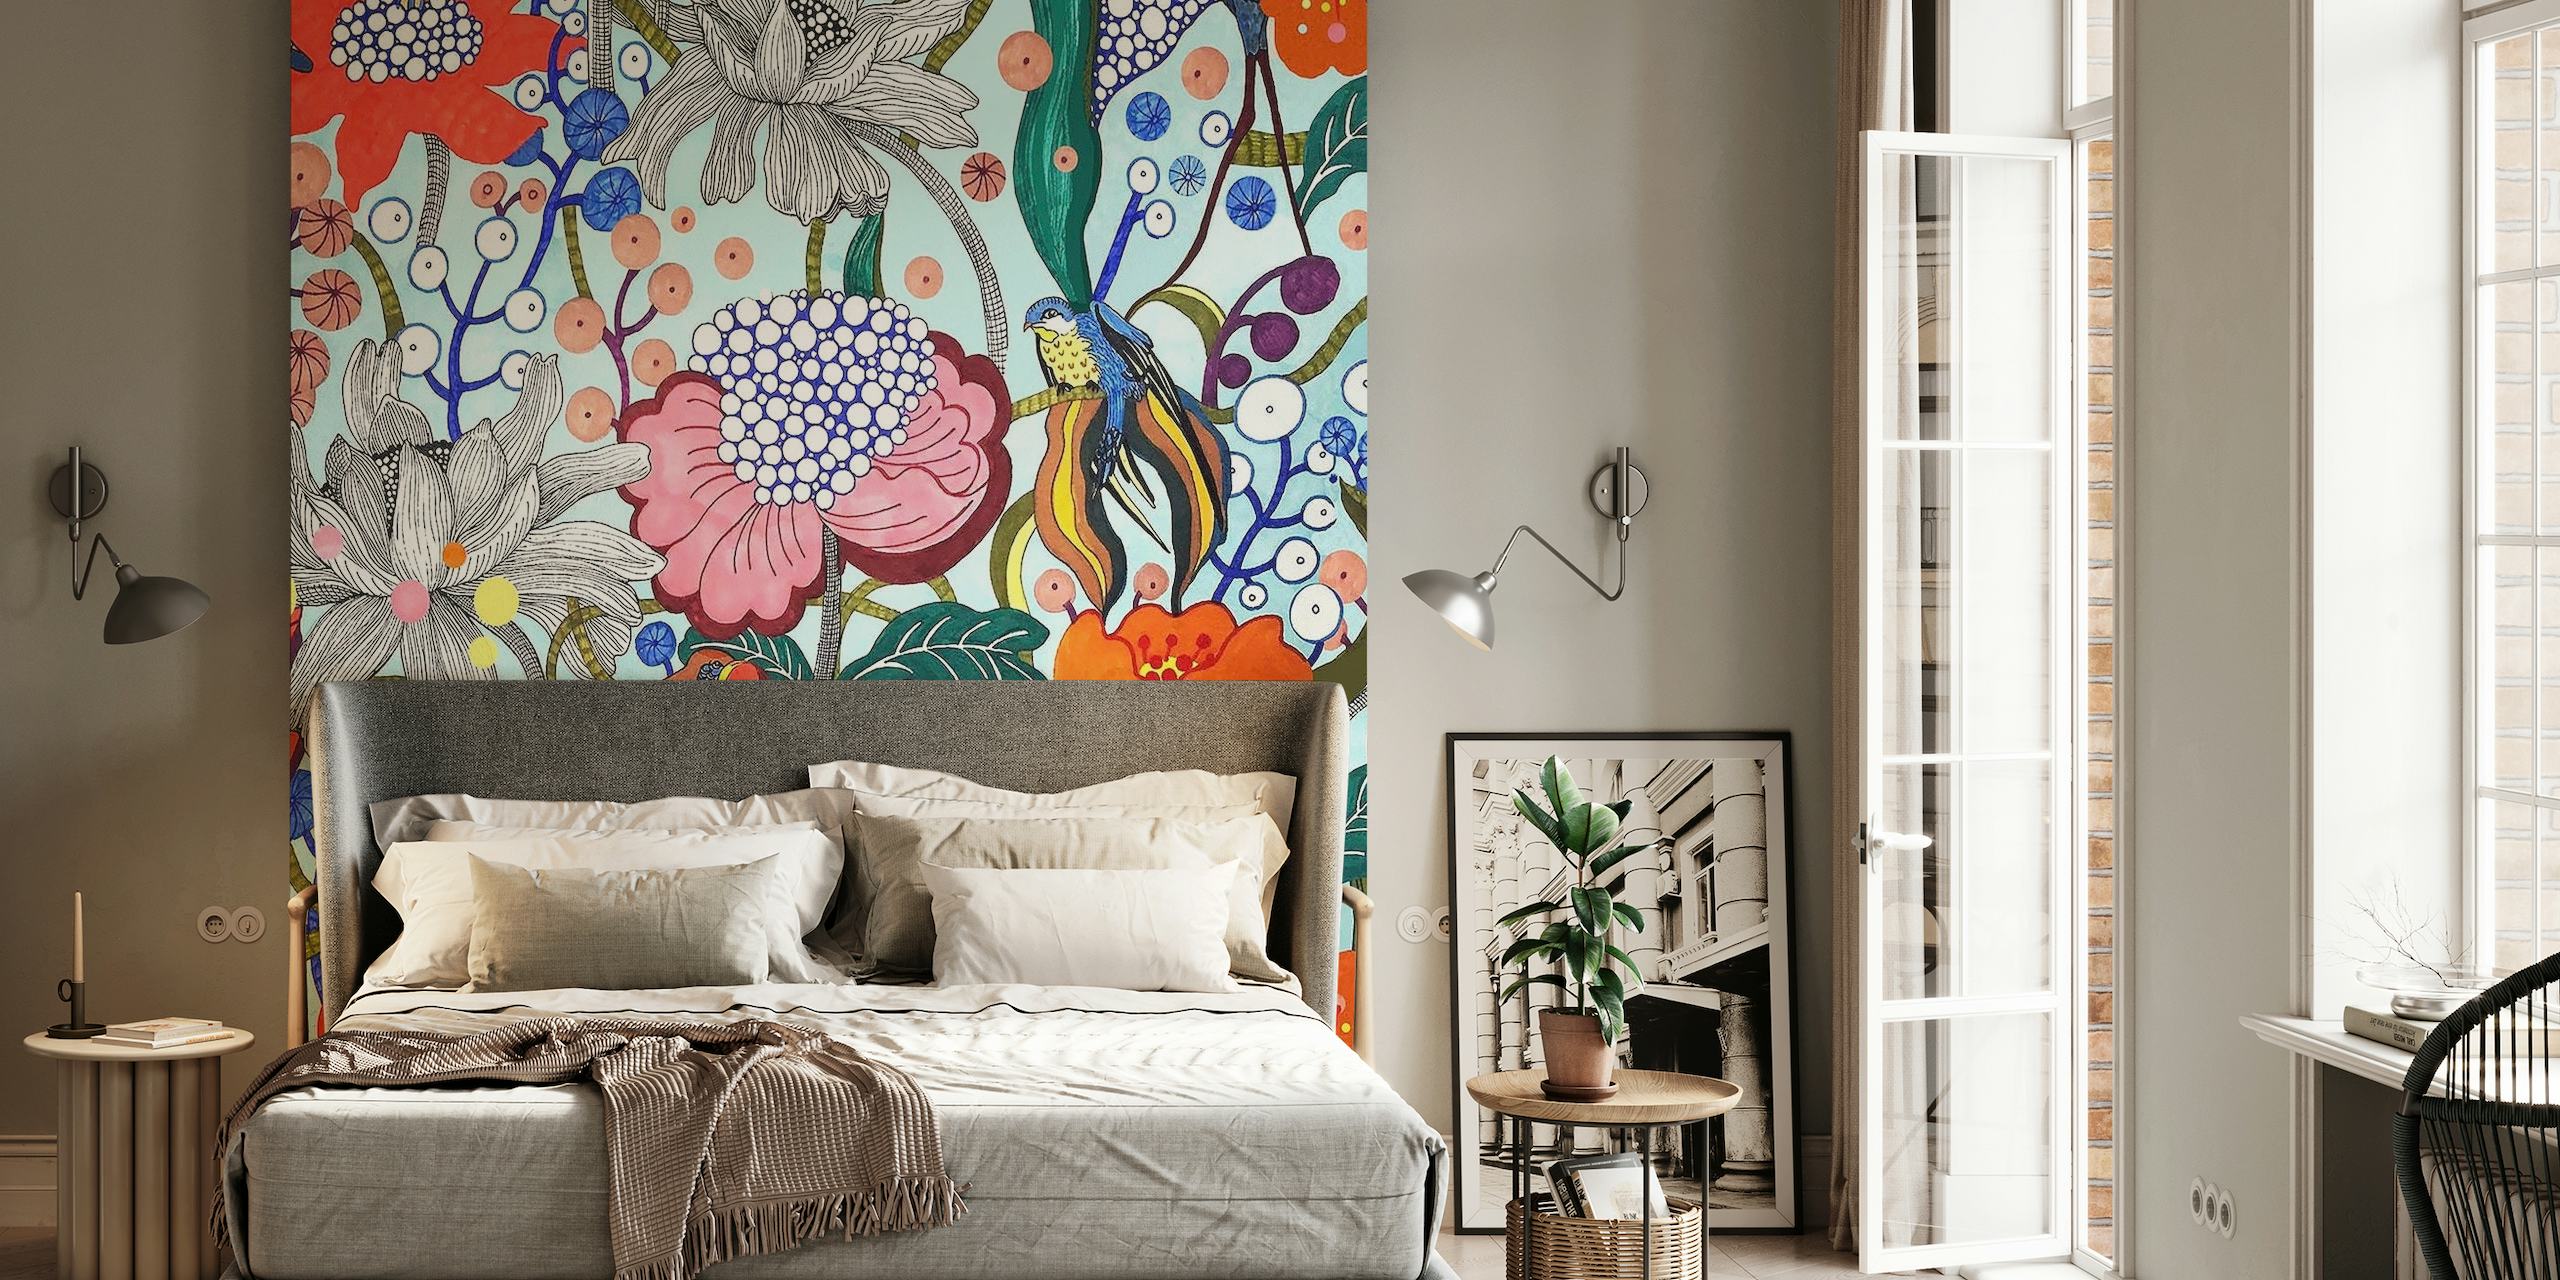 Colorful 'Birds of Paradise 2' wall mural with exotic birds and floral patterns